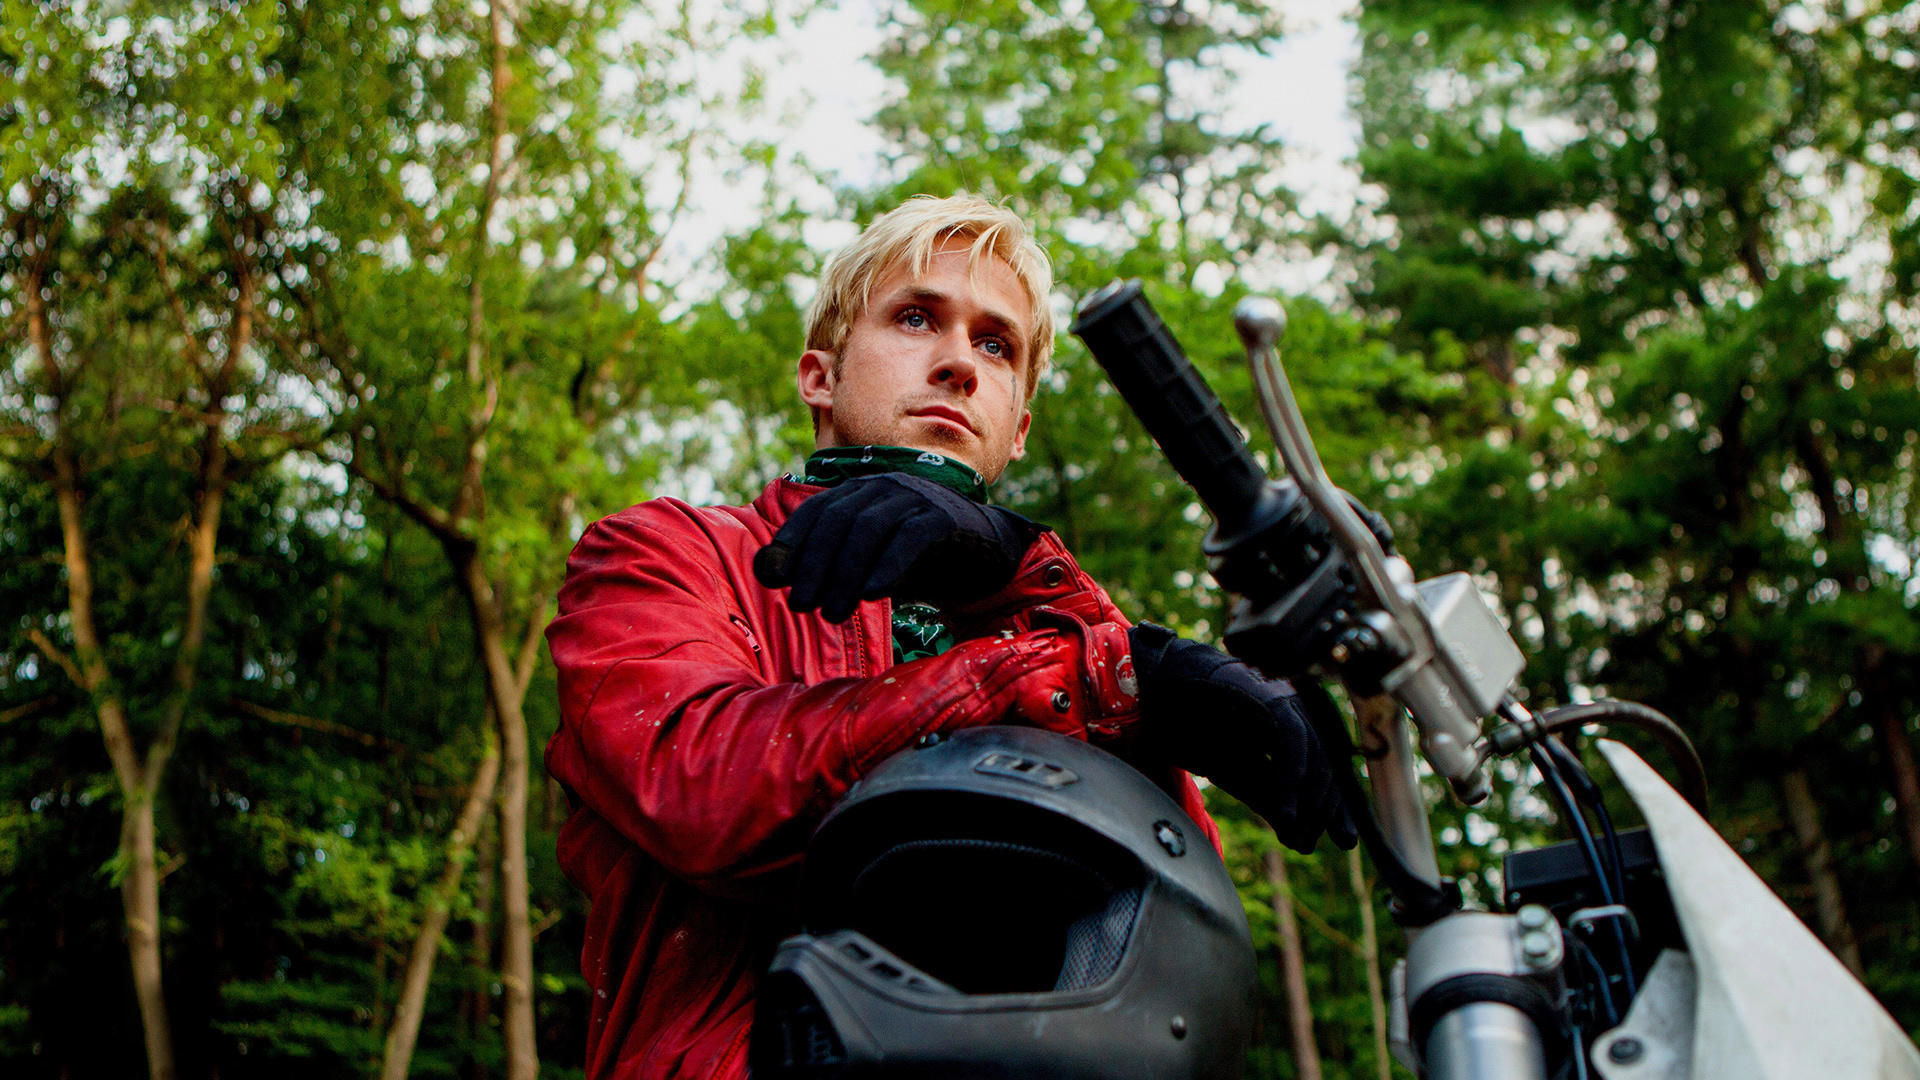 The Place Beyond The Pines Backgrounds, Compatible - PC, Mobile, Gadgets| 1920x1080 px